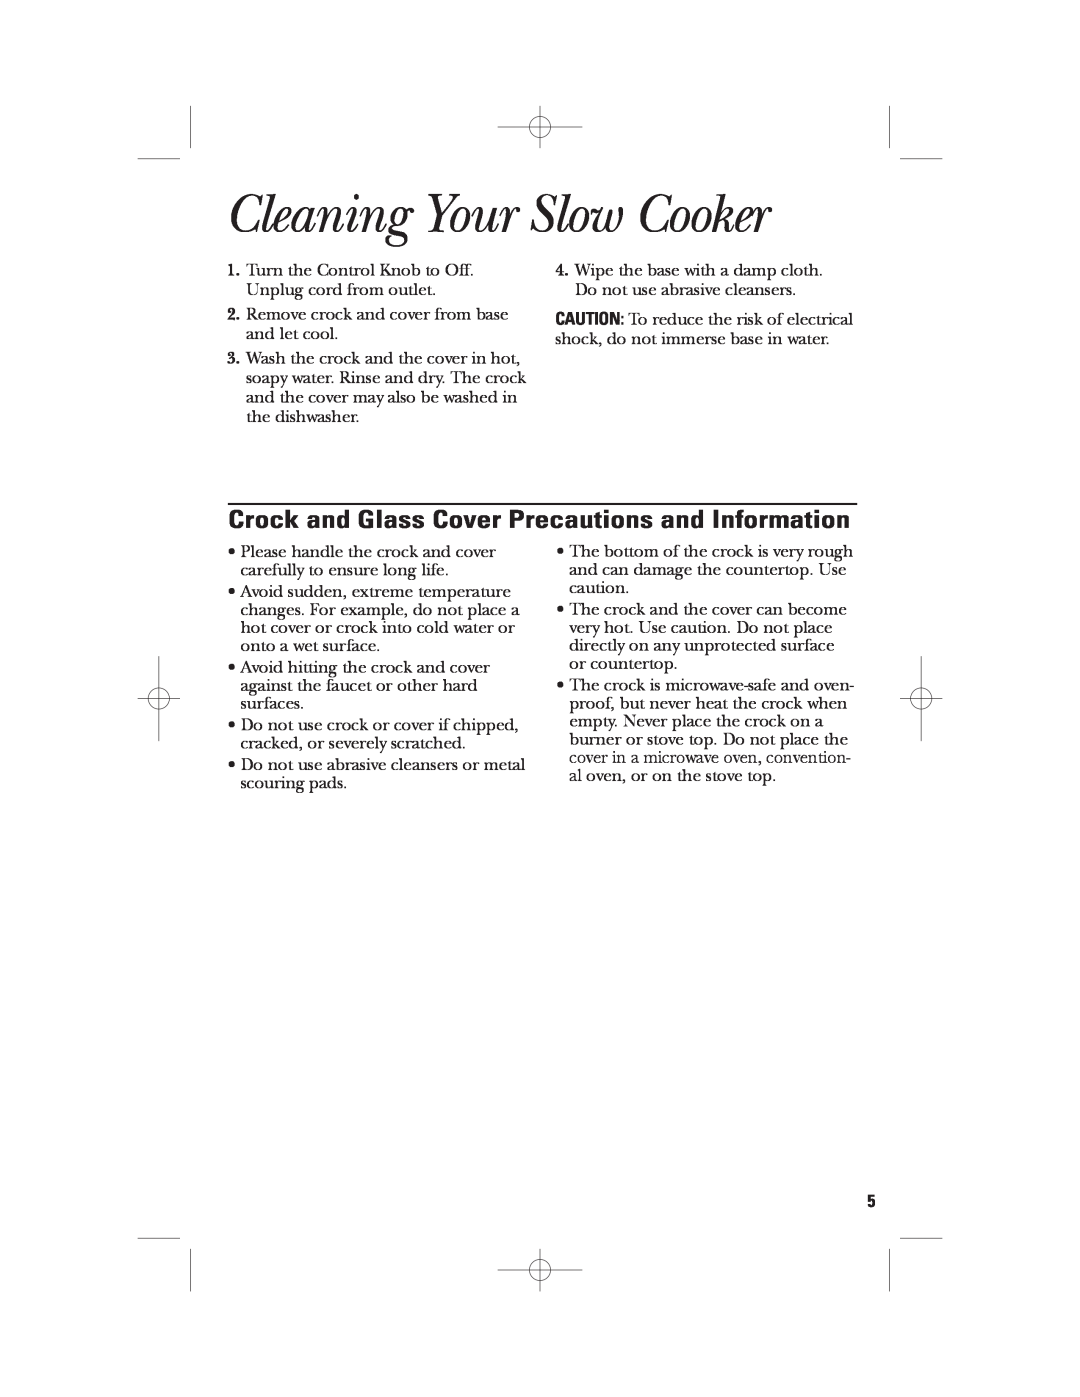 GE 169016 manual Cleaning Your Slow Cooker, Crock and Glass Cover Precautions and Information 